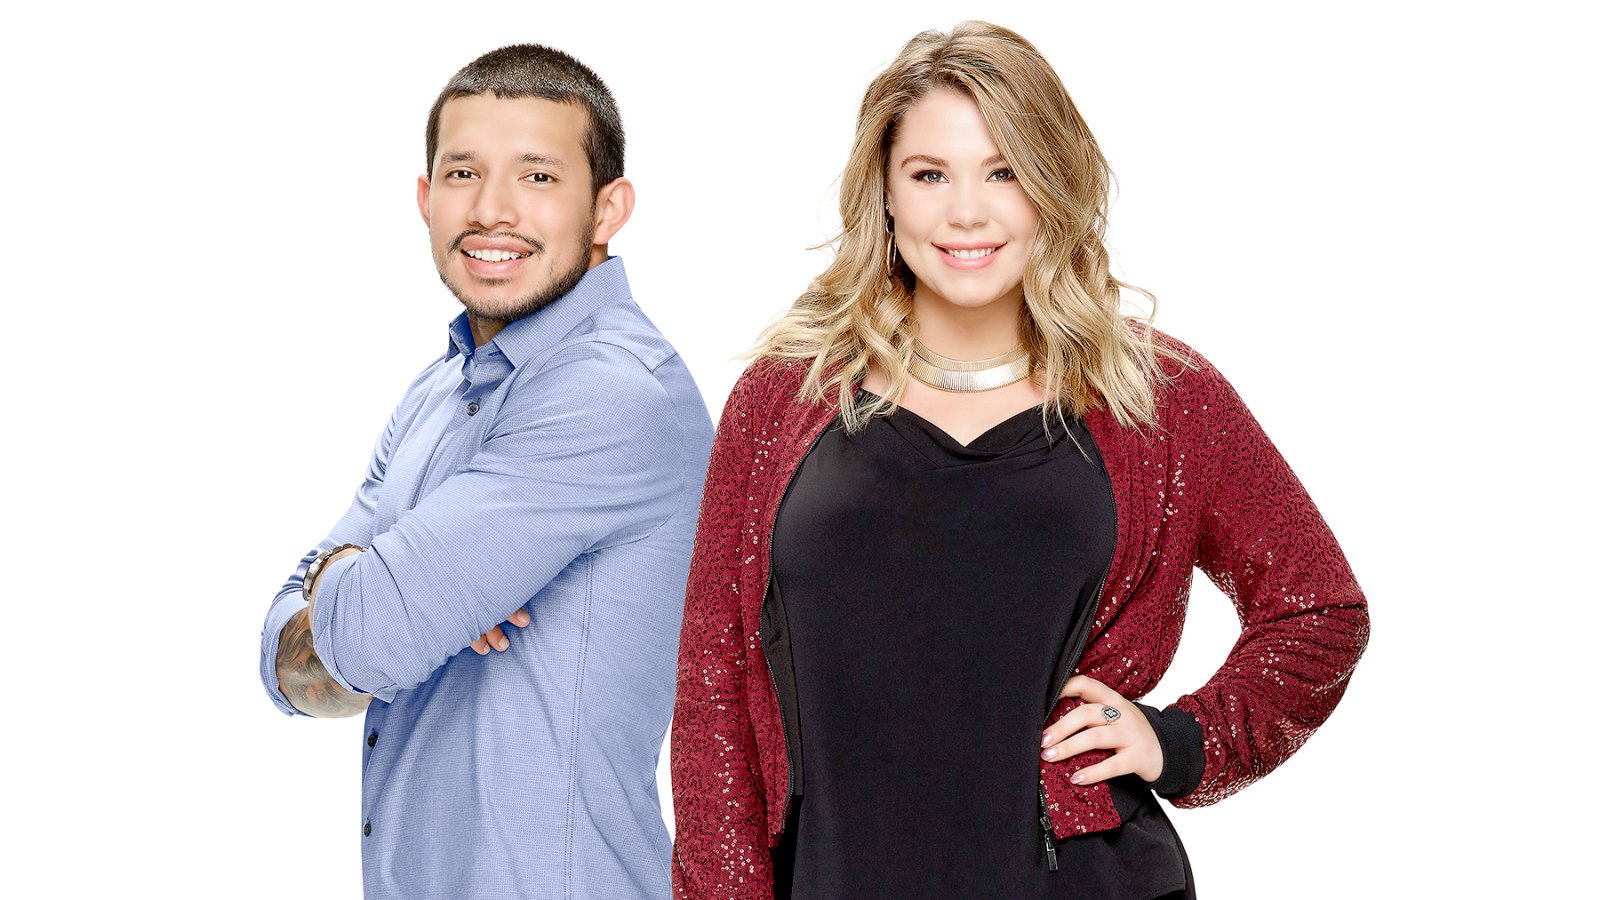 Kailyn-Lowry-Claims-Javi-Marroquin-Cheated-on-His-Pregnant-Fiancee